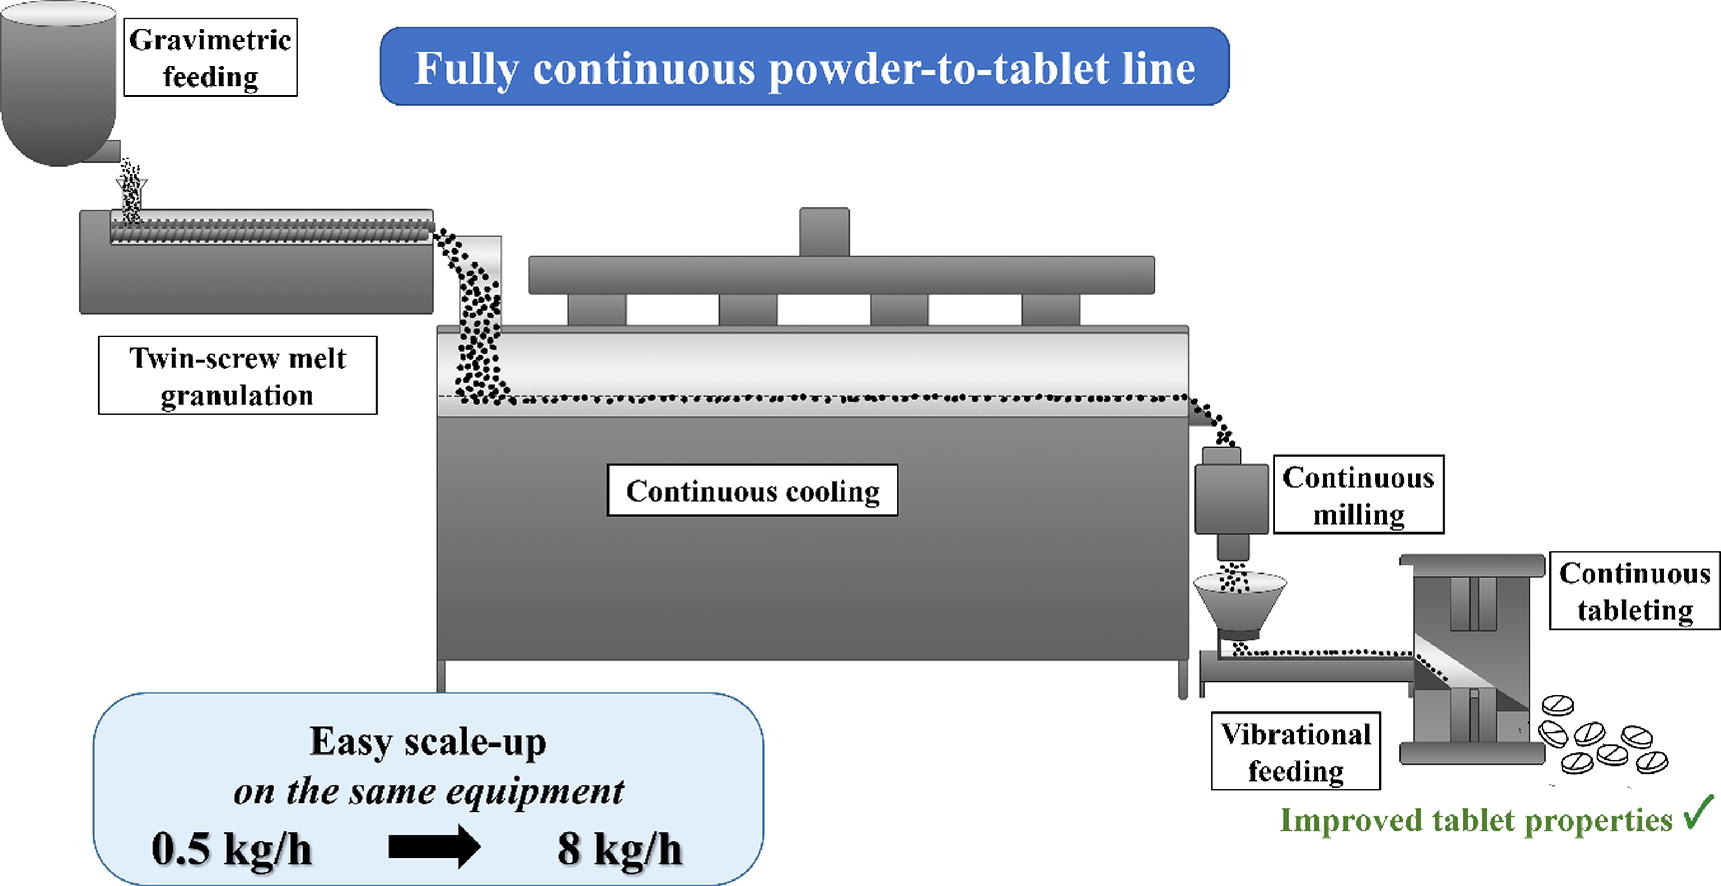 Integrated continuous melt granulation-based powder-to-tablet line: process investigation and scale-up on the same equipment